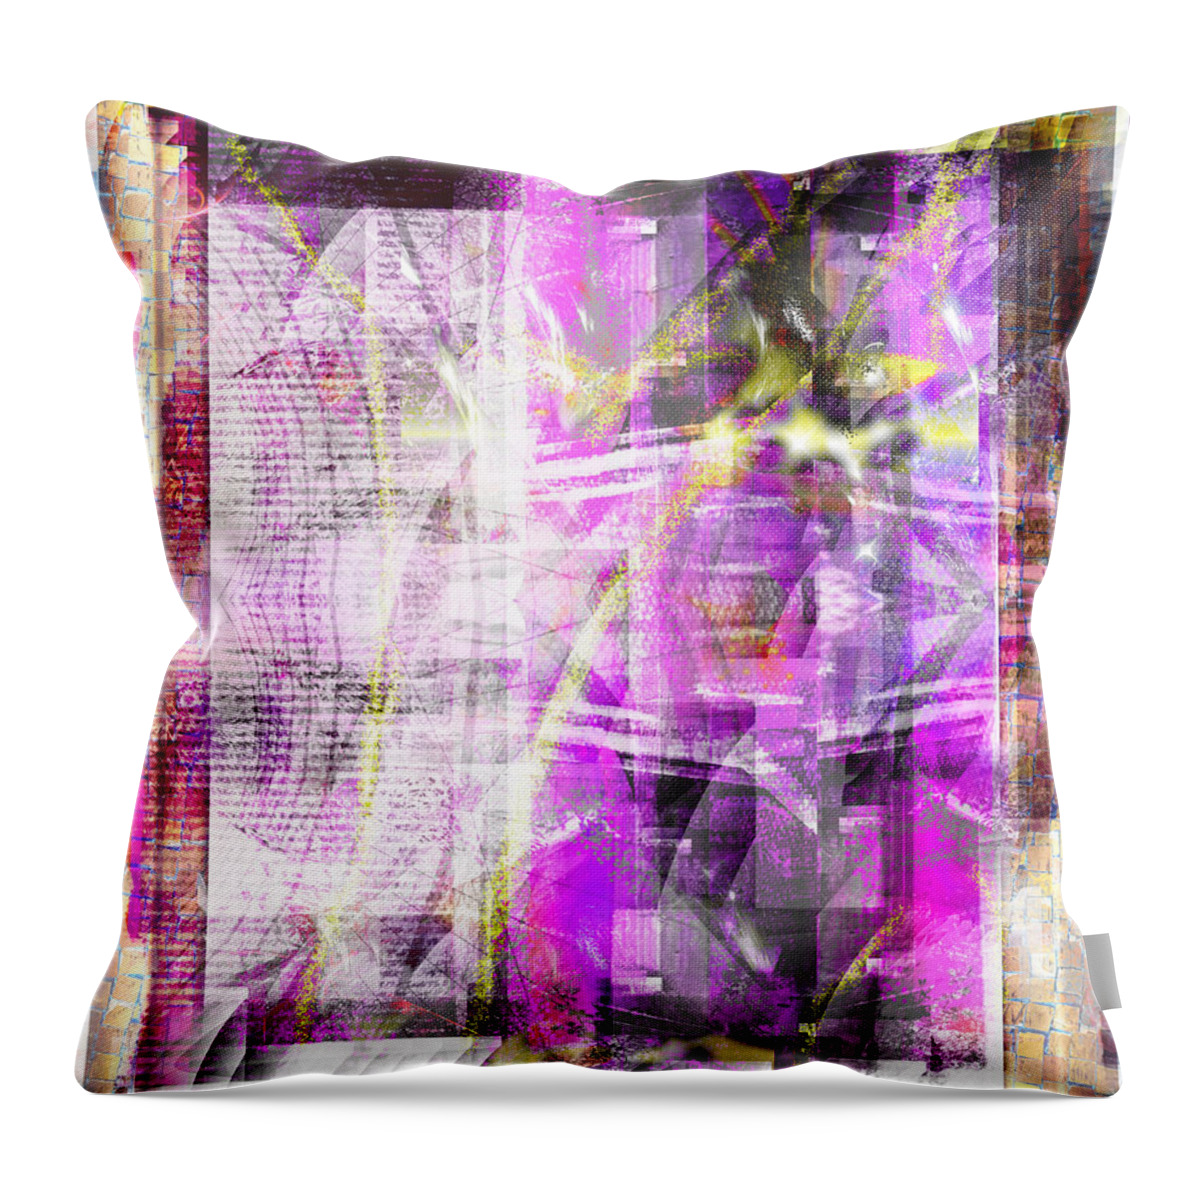 Abstract Throw Pillow featuring the digital art The Bridge.. by Art Di